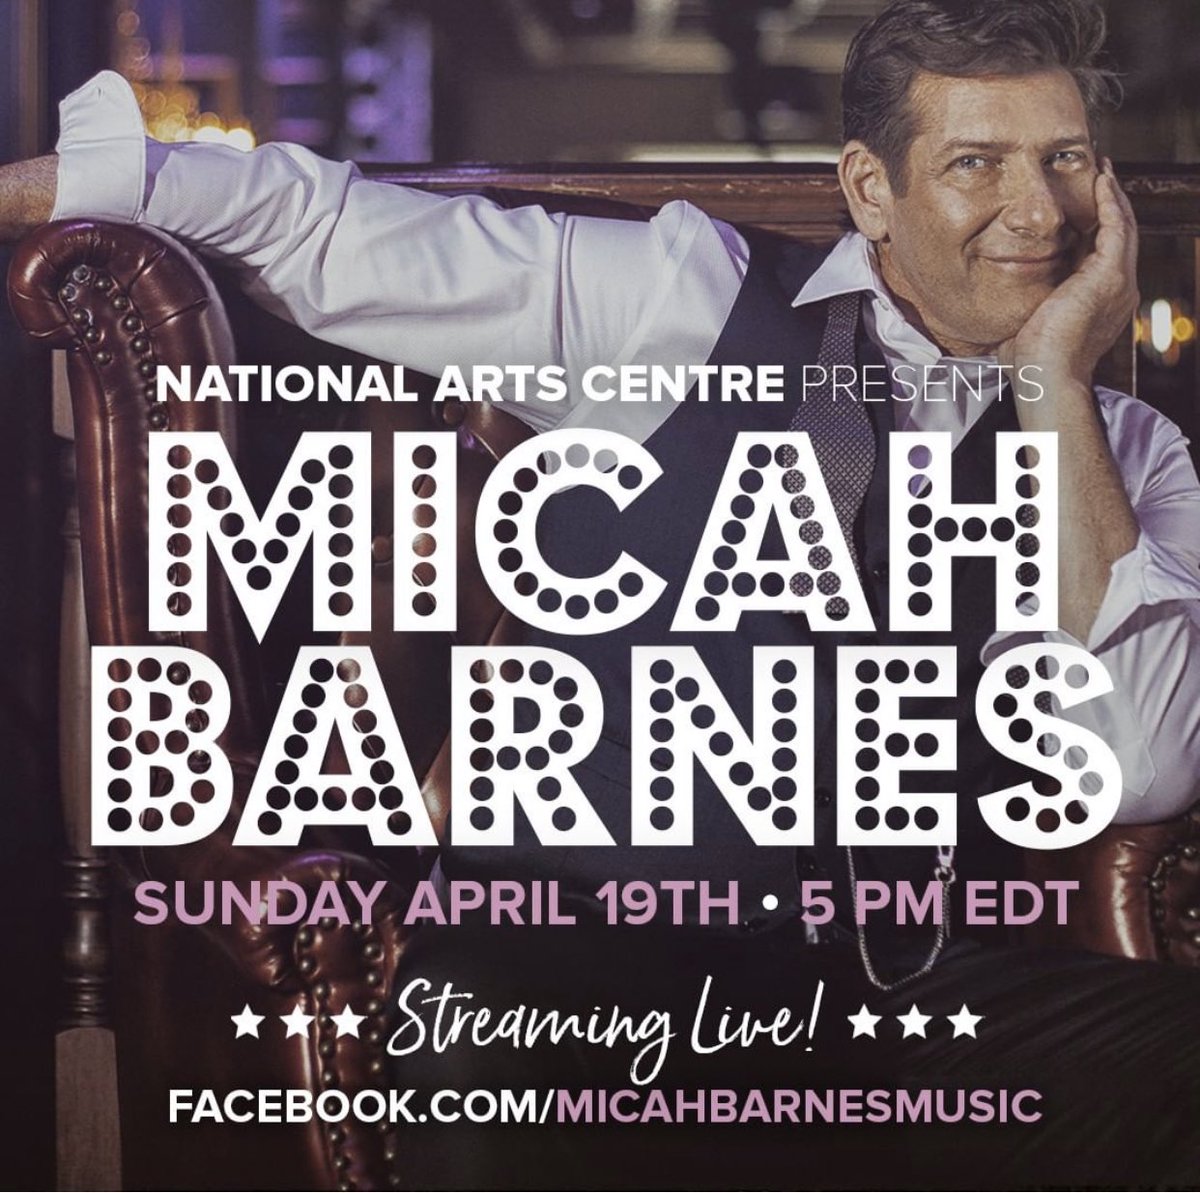 Micah Barnes is streaming live on Facebook this afternoon at 5pm as part of @CanadasNAC’s #CanadaPerforms series. Tune in! We will share over on our FB page.